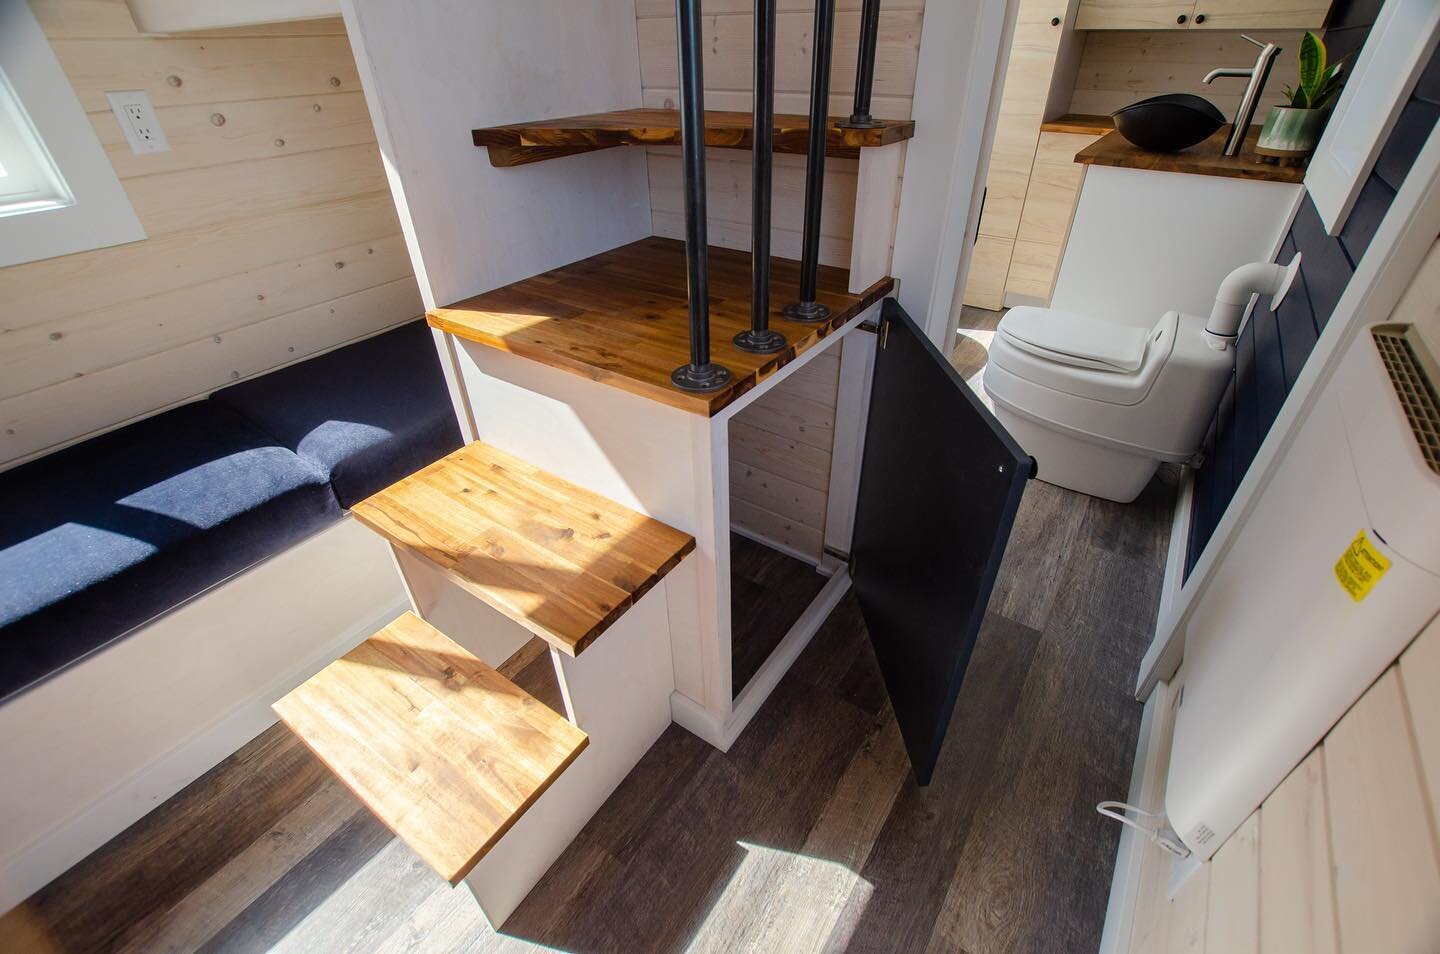 Ontario's Cheap Tiny Homes Let You Live Your Best Minimalist Life - Narcity